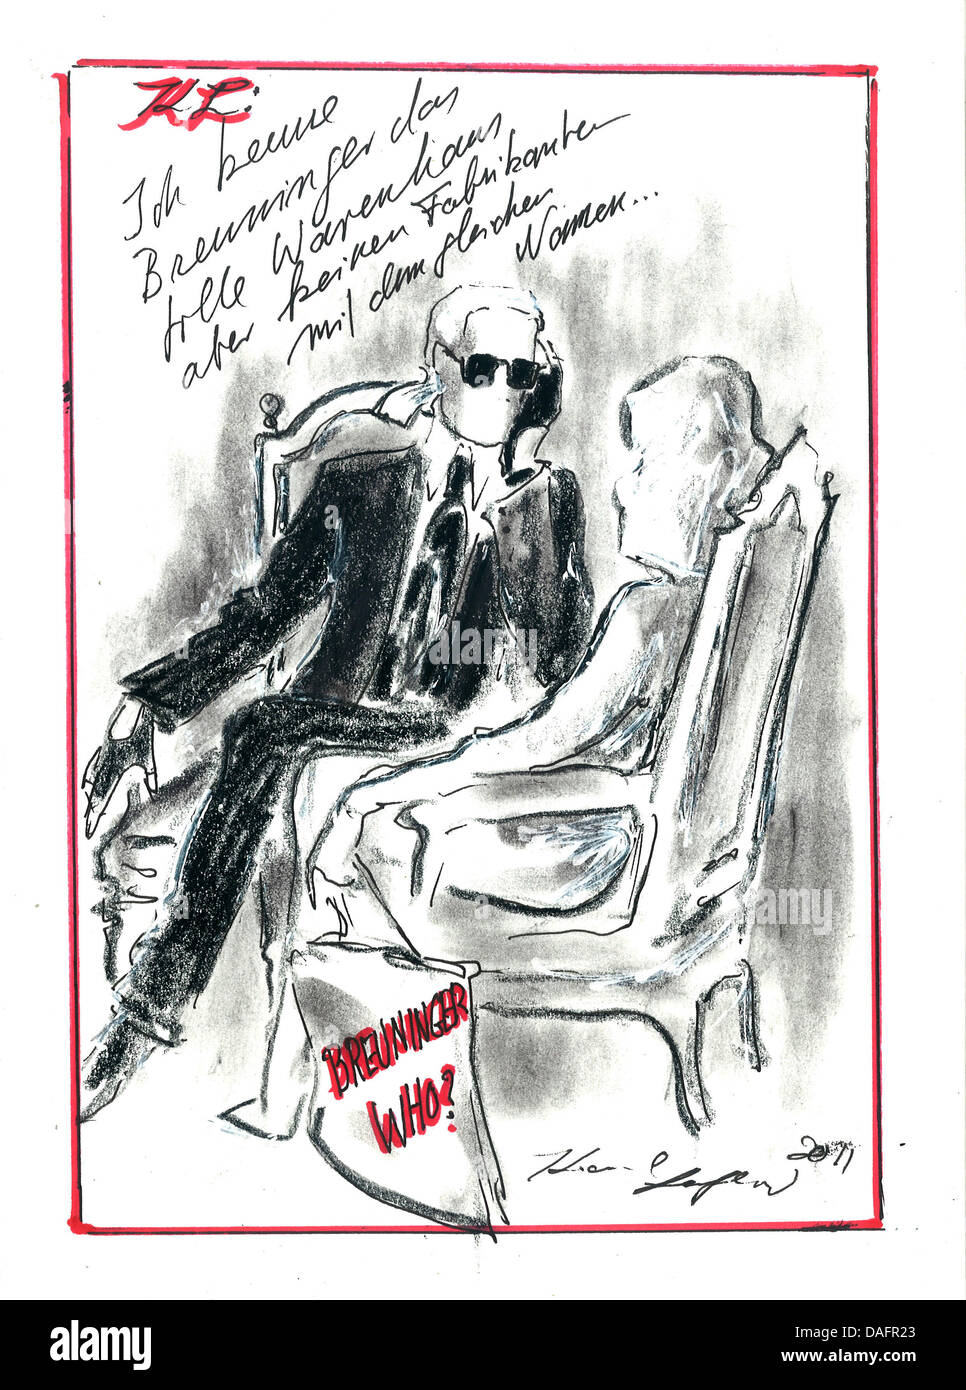 ILLUSTRATION - A drawing dated 08 December 2011 shows a seated Karl Lagerfeld talking to s seated woman in Stuttgart, Germany. Karl Lagerfeld made this drawing to apologise for his faux pas during the German television show 'Wetten, dass..?'. When asked about his new fashion line at the Stuttgart fashion house Breuninger he replied: 'What do they do? I don not know the name Breunin Stock Photo